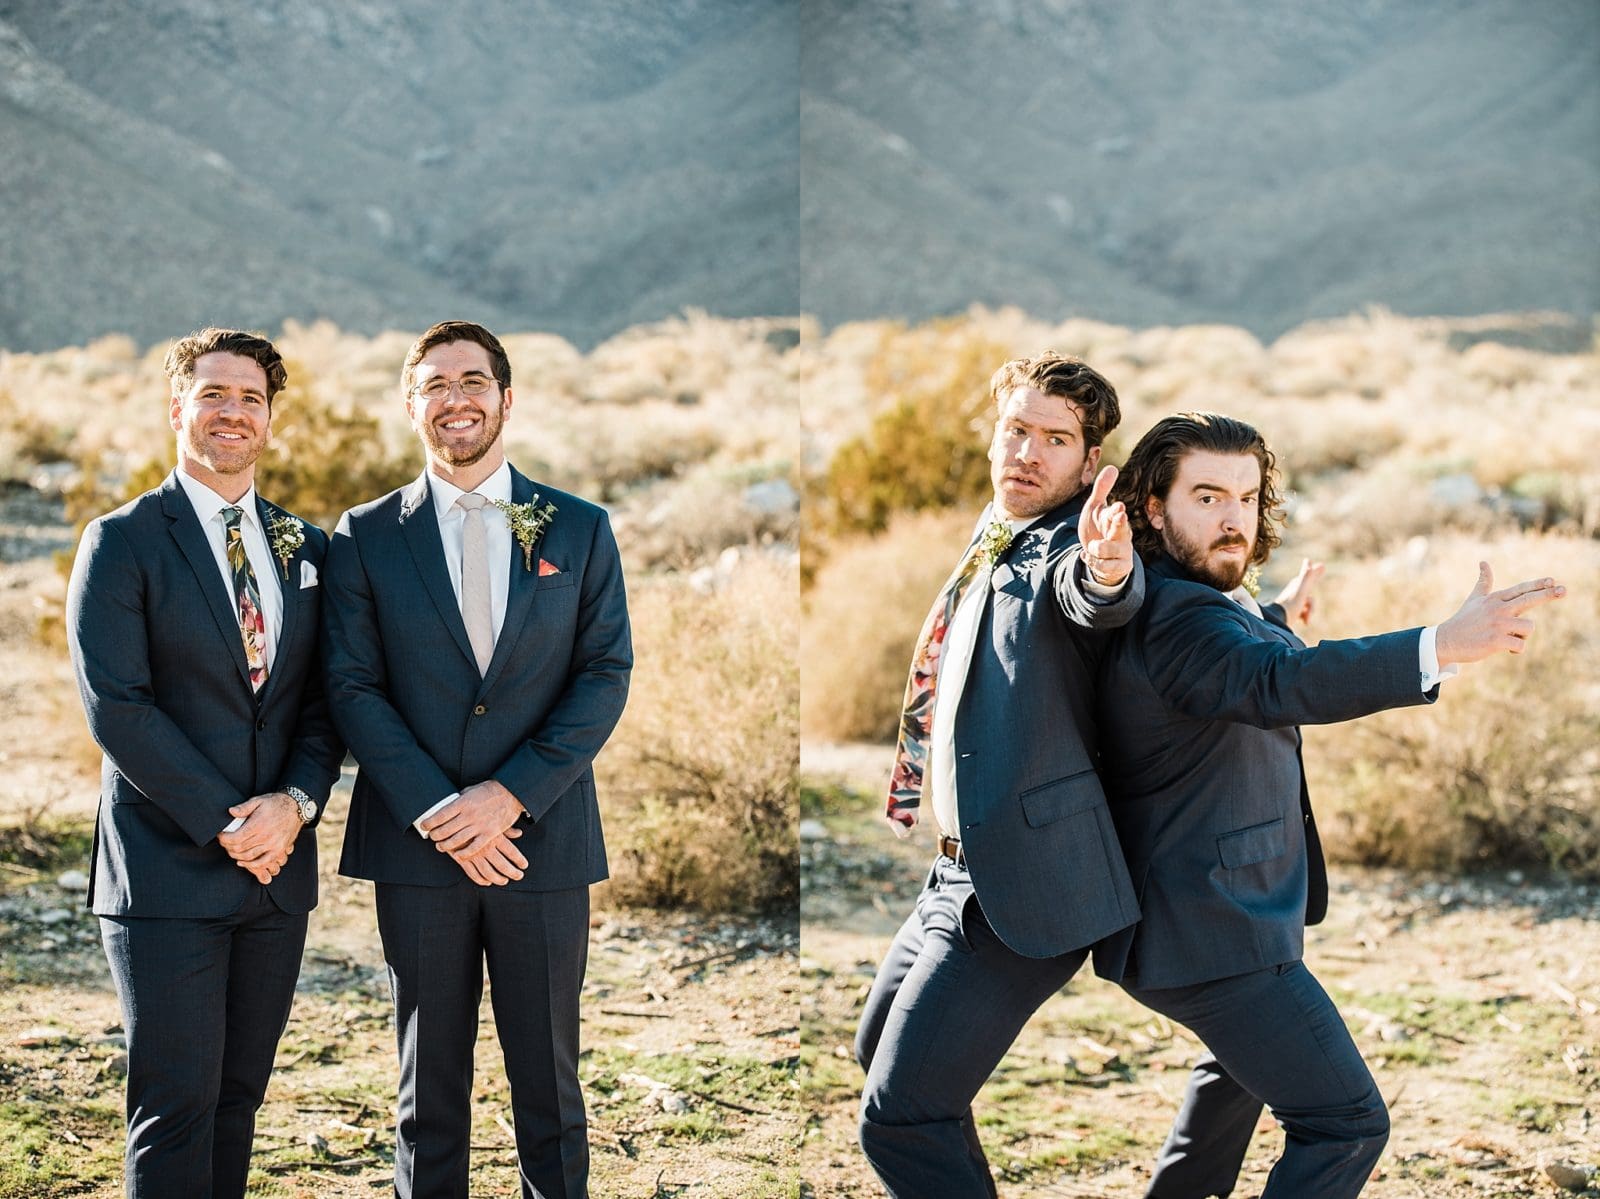 large wedding party photos in the desert palm springs wedding